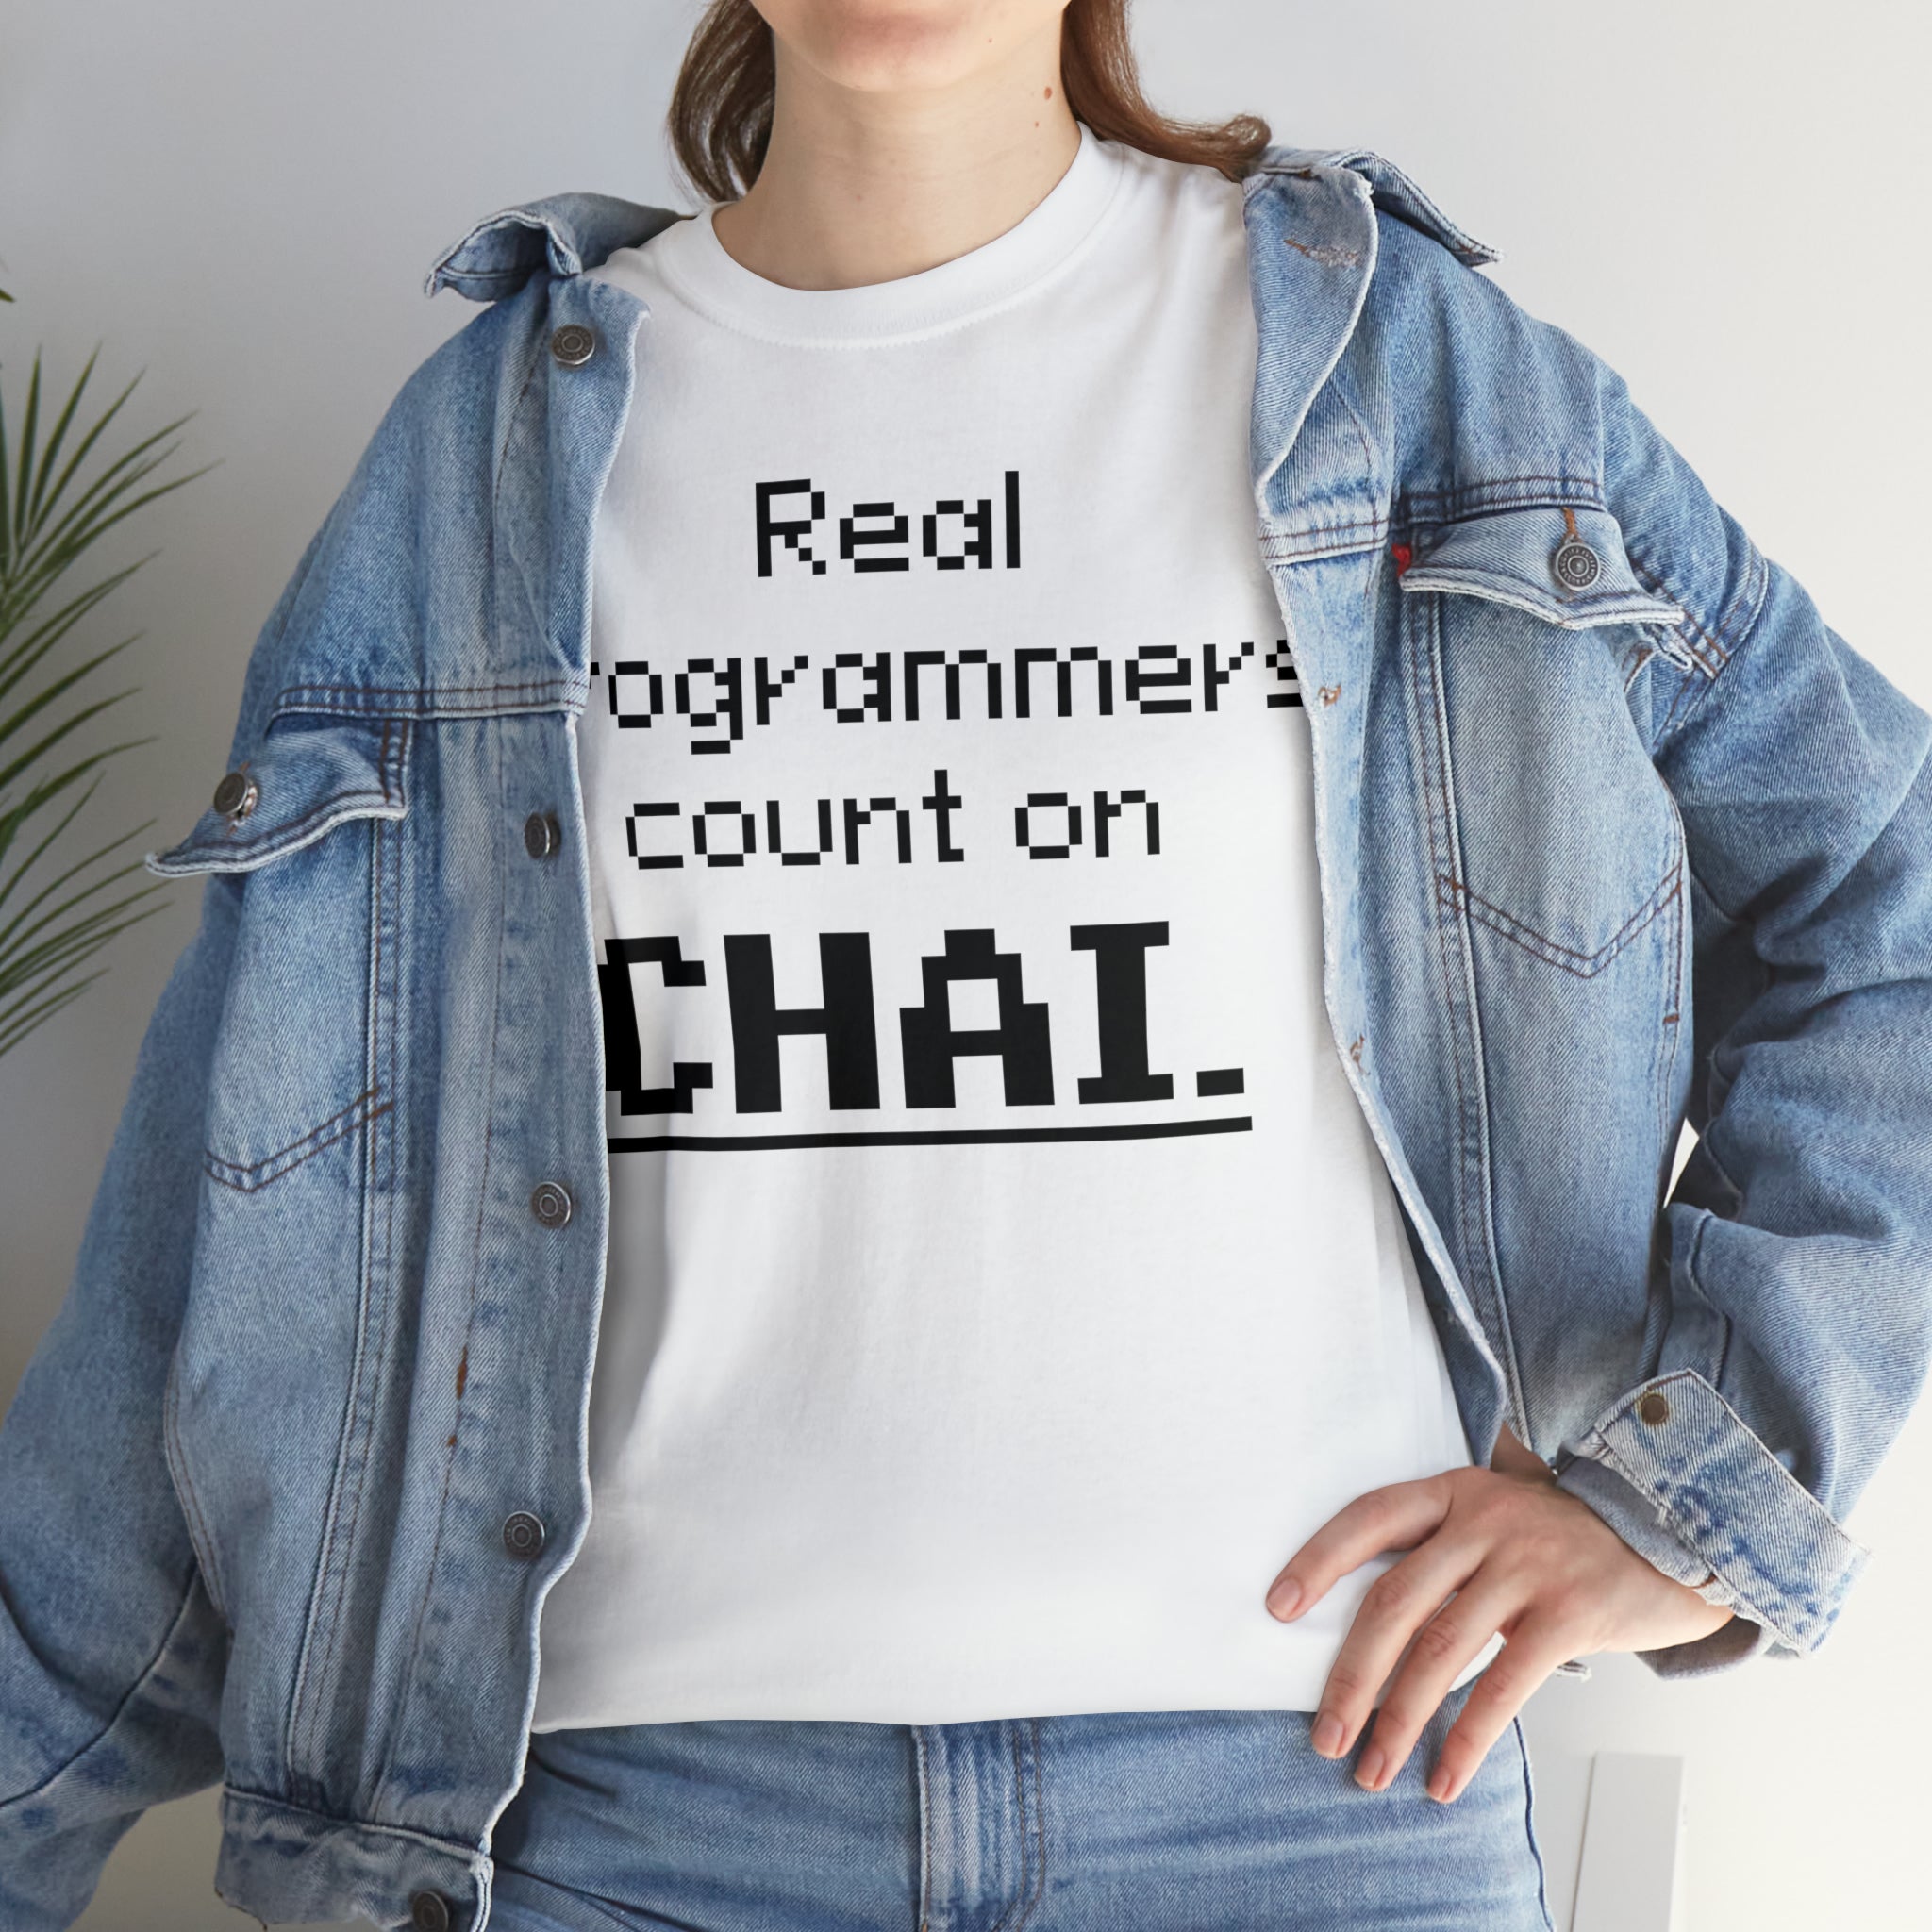 Real Programmers Count on Chai T-Shirt Design by C&C